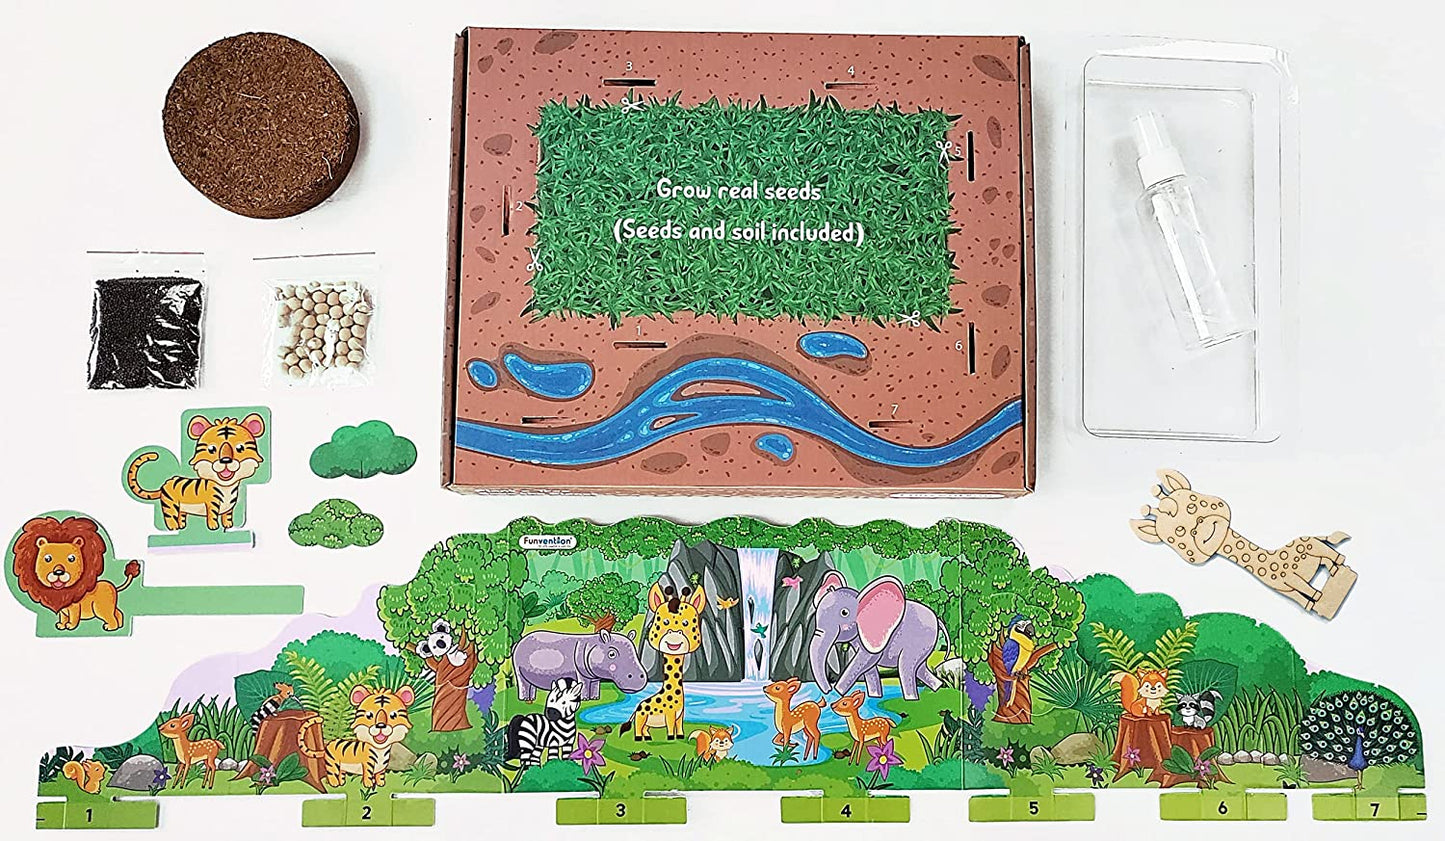 Funvention Jungle Garden Irrigation Learning STEM Kit for Kids - All-In-One Gardening Set with Real Seeds, Soil, and MDF Animal Shapes